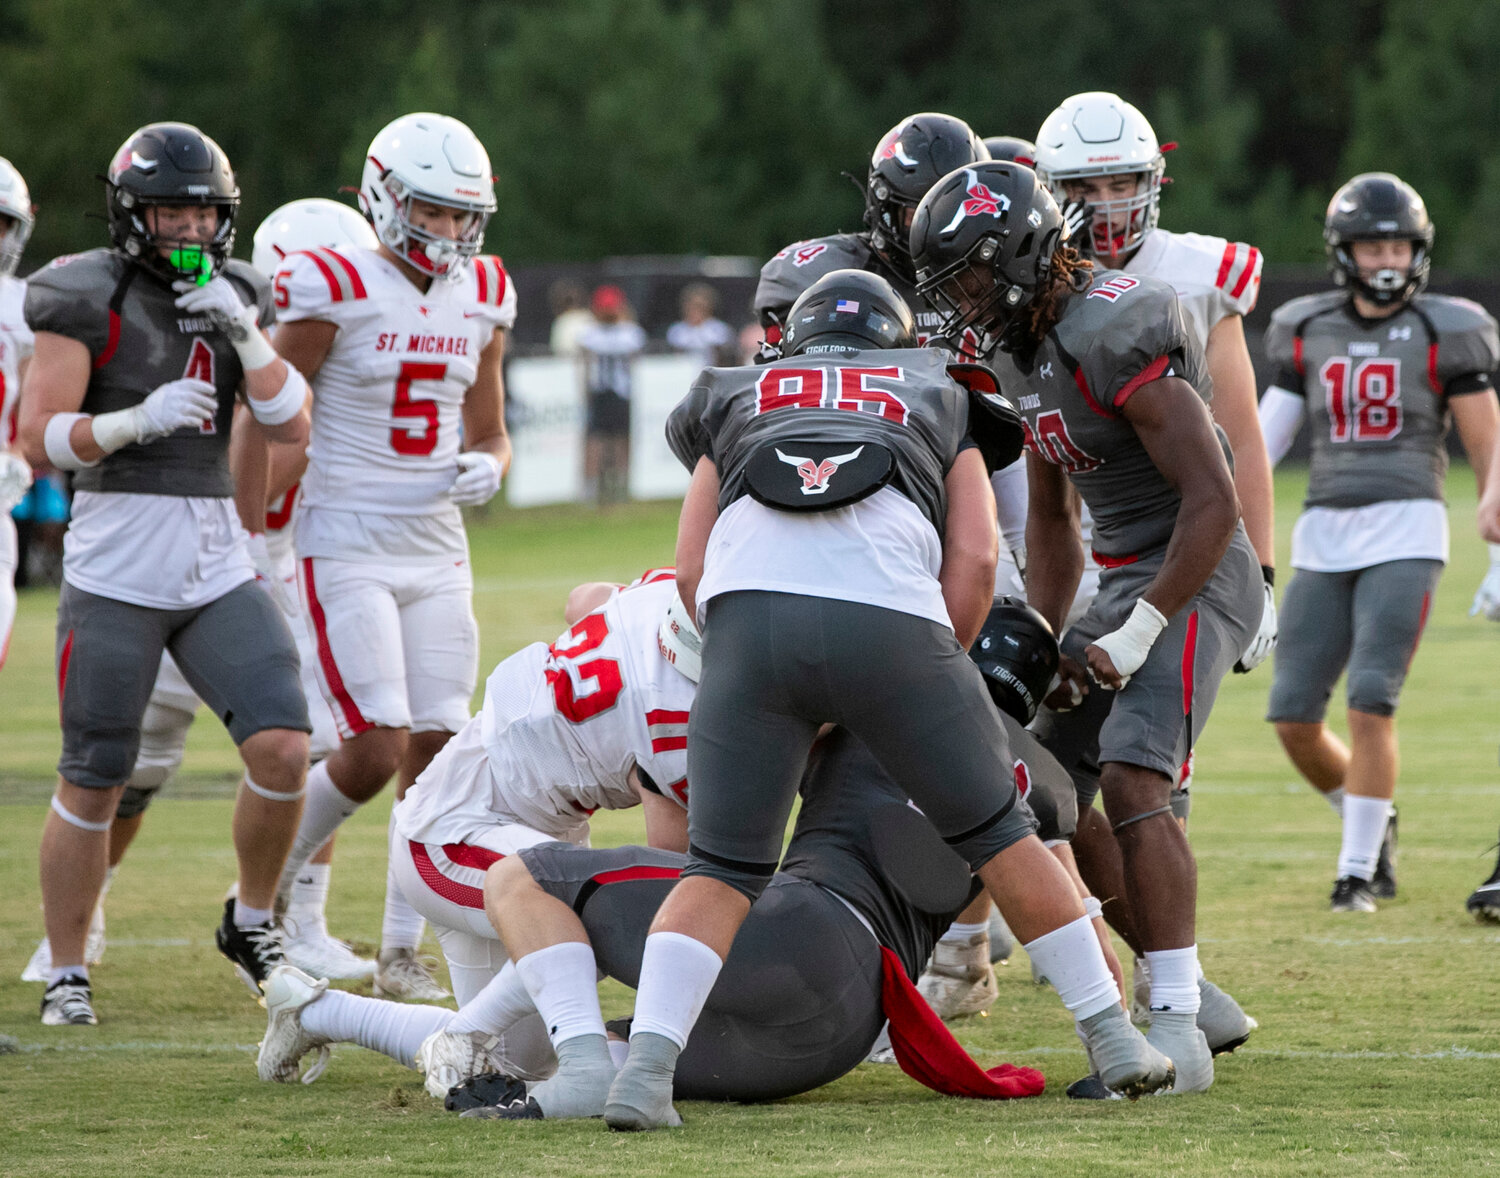 The Spanish Fort defense, including Sterling Dixon (10) and Grey Freeman (95), celebrate a stop in the first half of the preseason jamboree between the Toros and St. Michael Cardinals on Thursday, Aug. 17. Dixon was recently one of three Alabamian linebackers named to the High School Butkus Award watch list that is awarded to the top linebacker in the game at both the college and high school level.